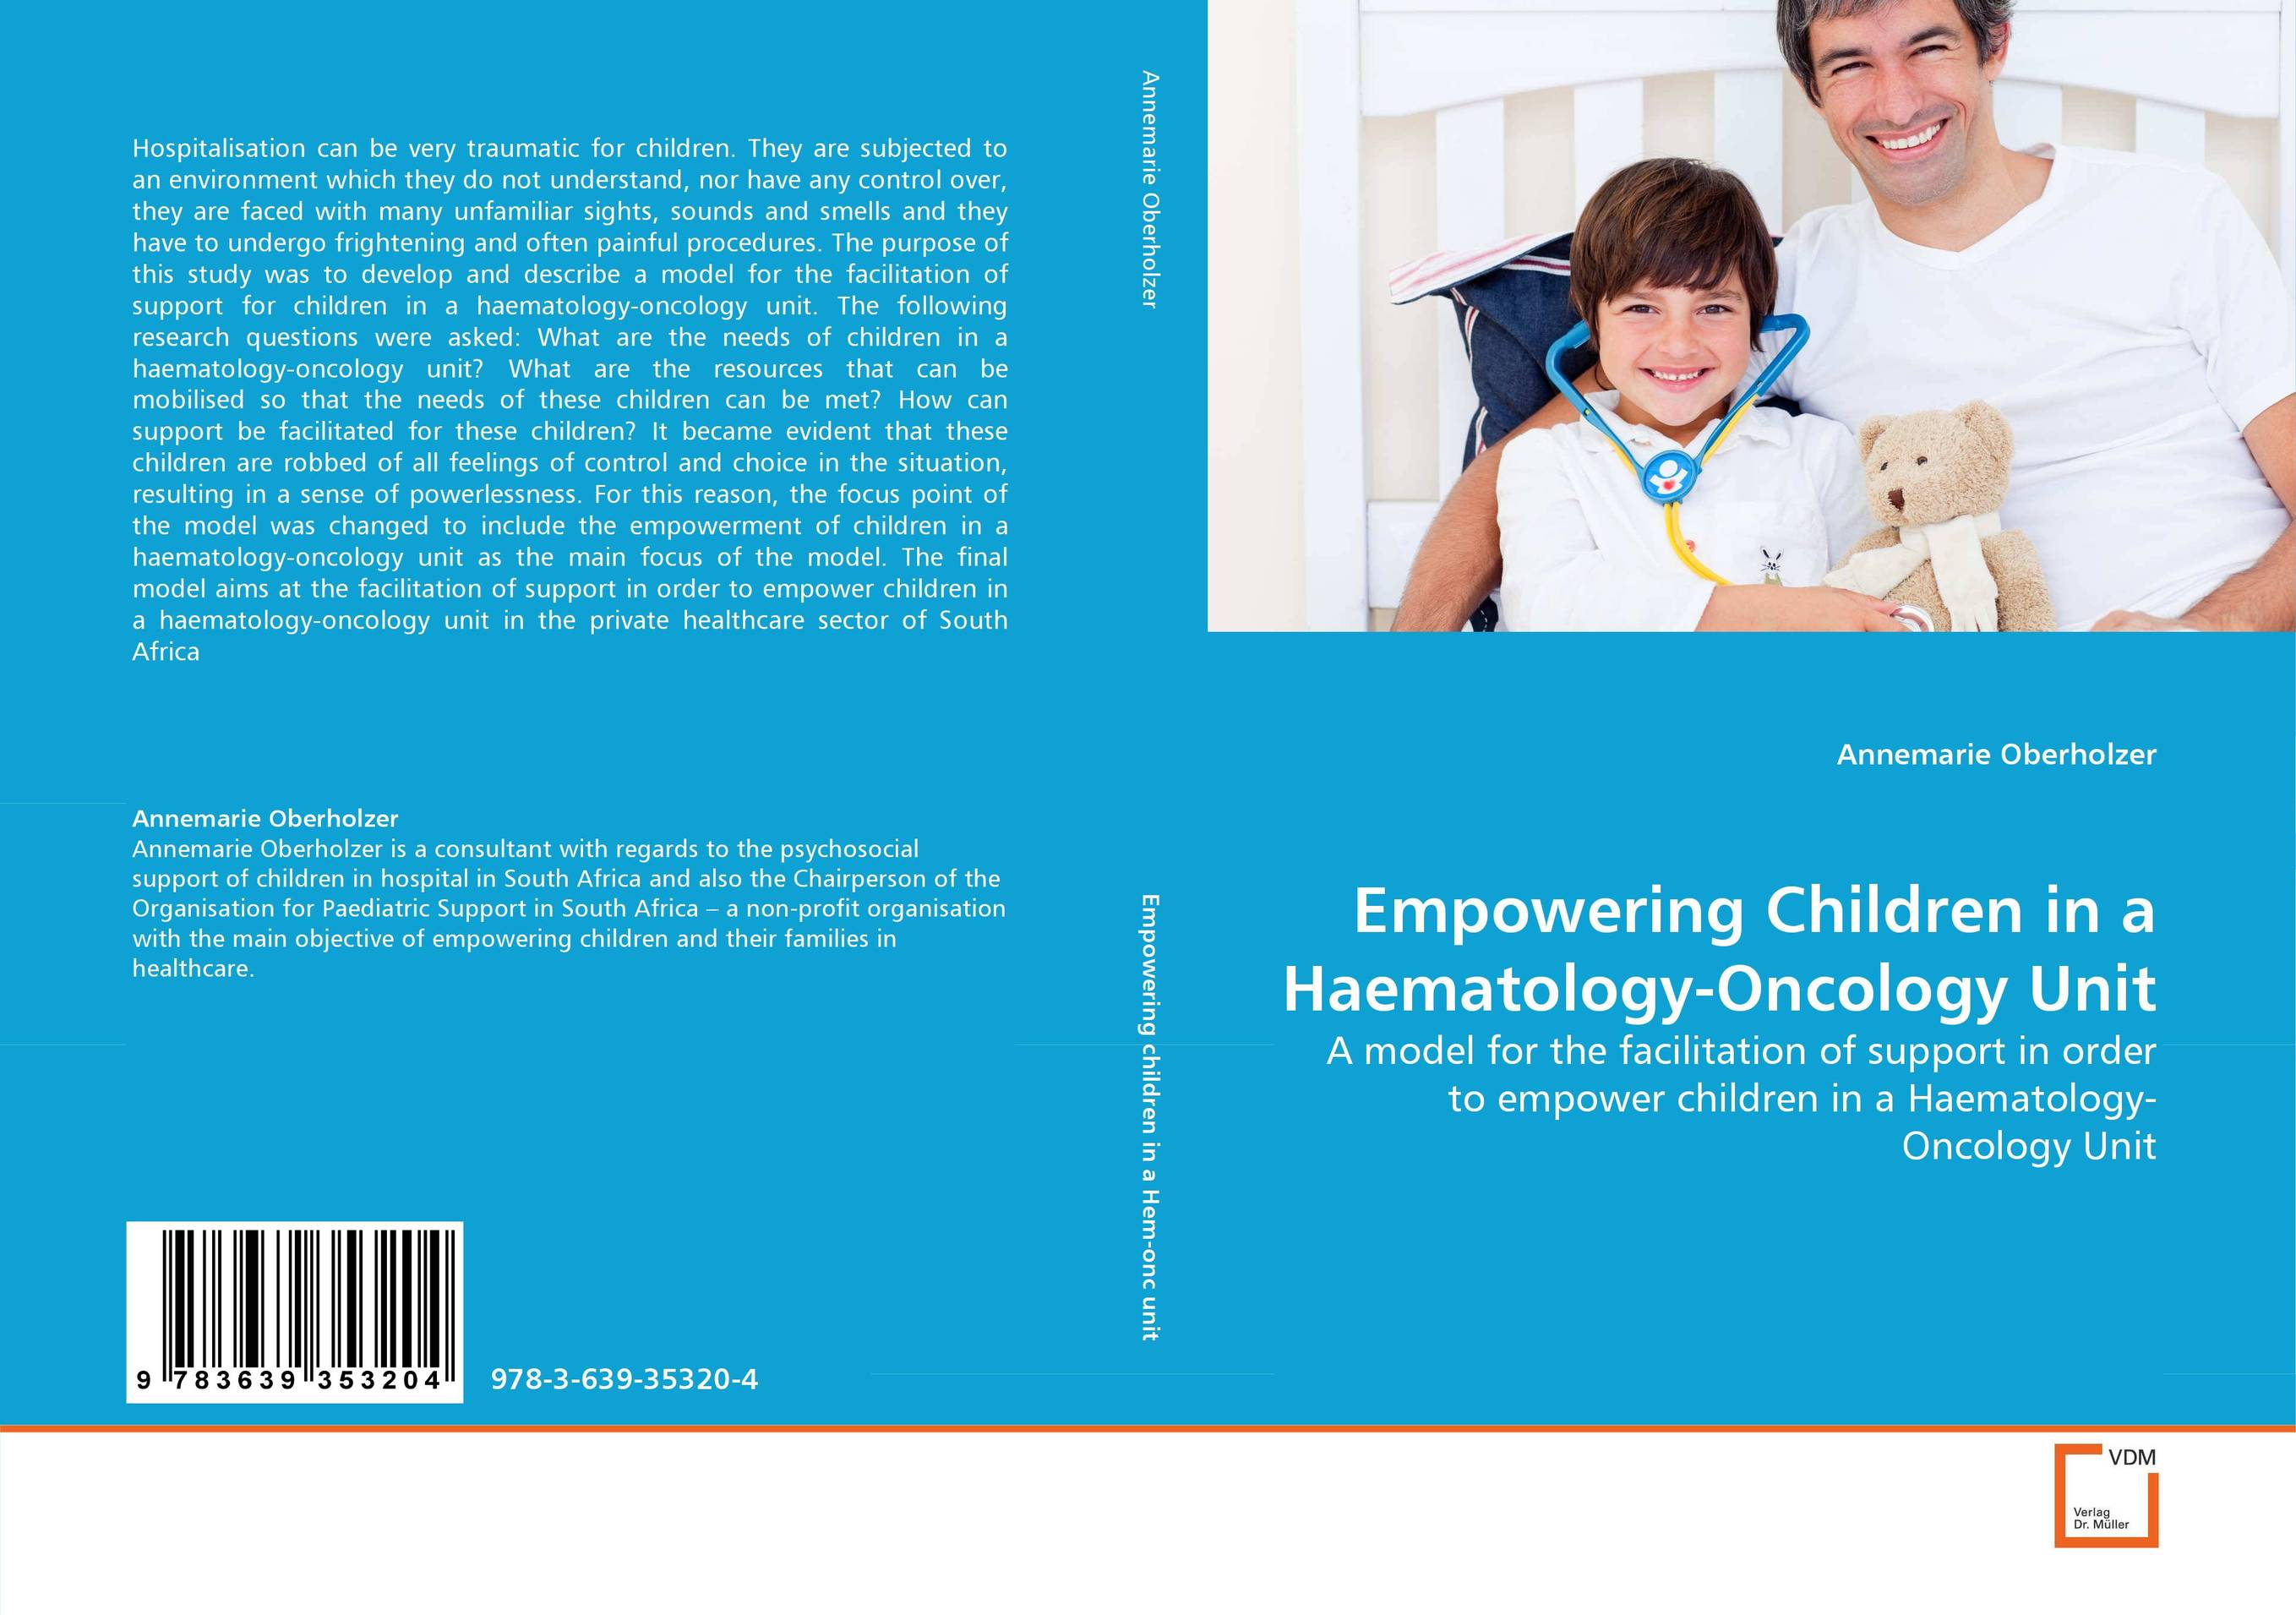 Empowering Children in a Haematology-Oncology Unit